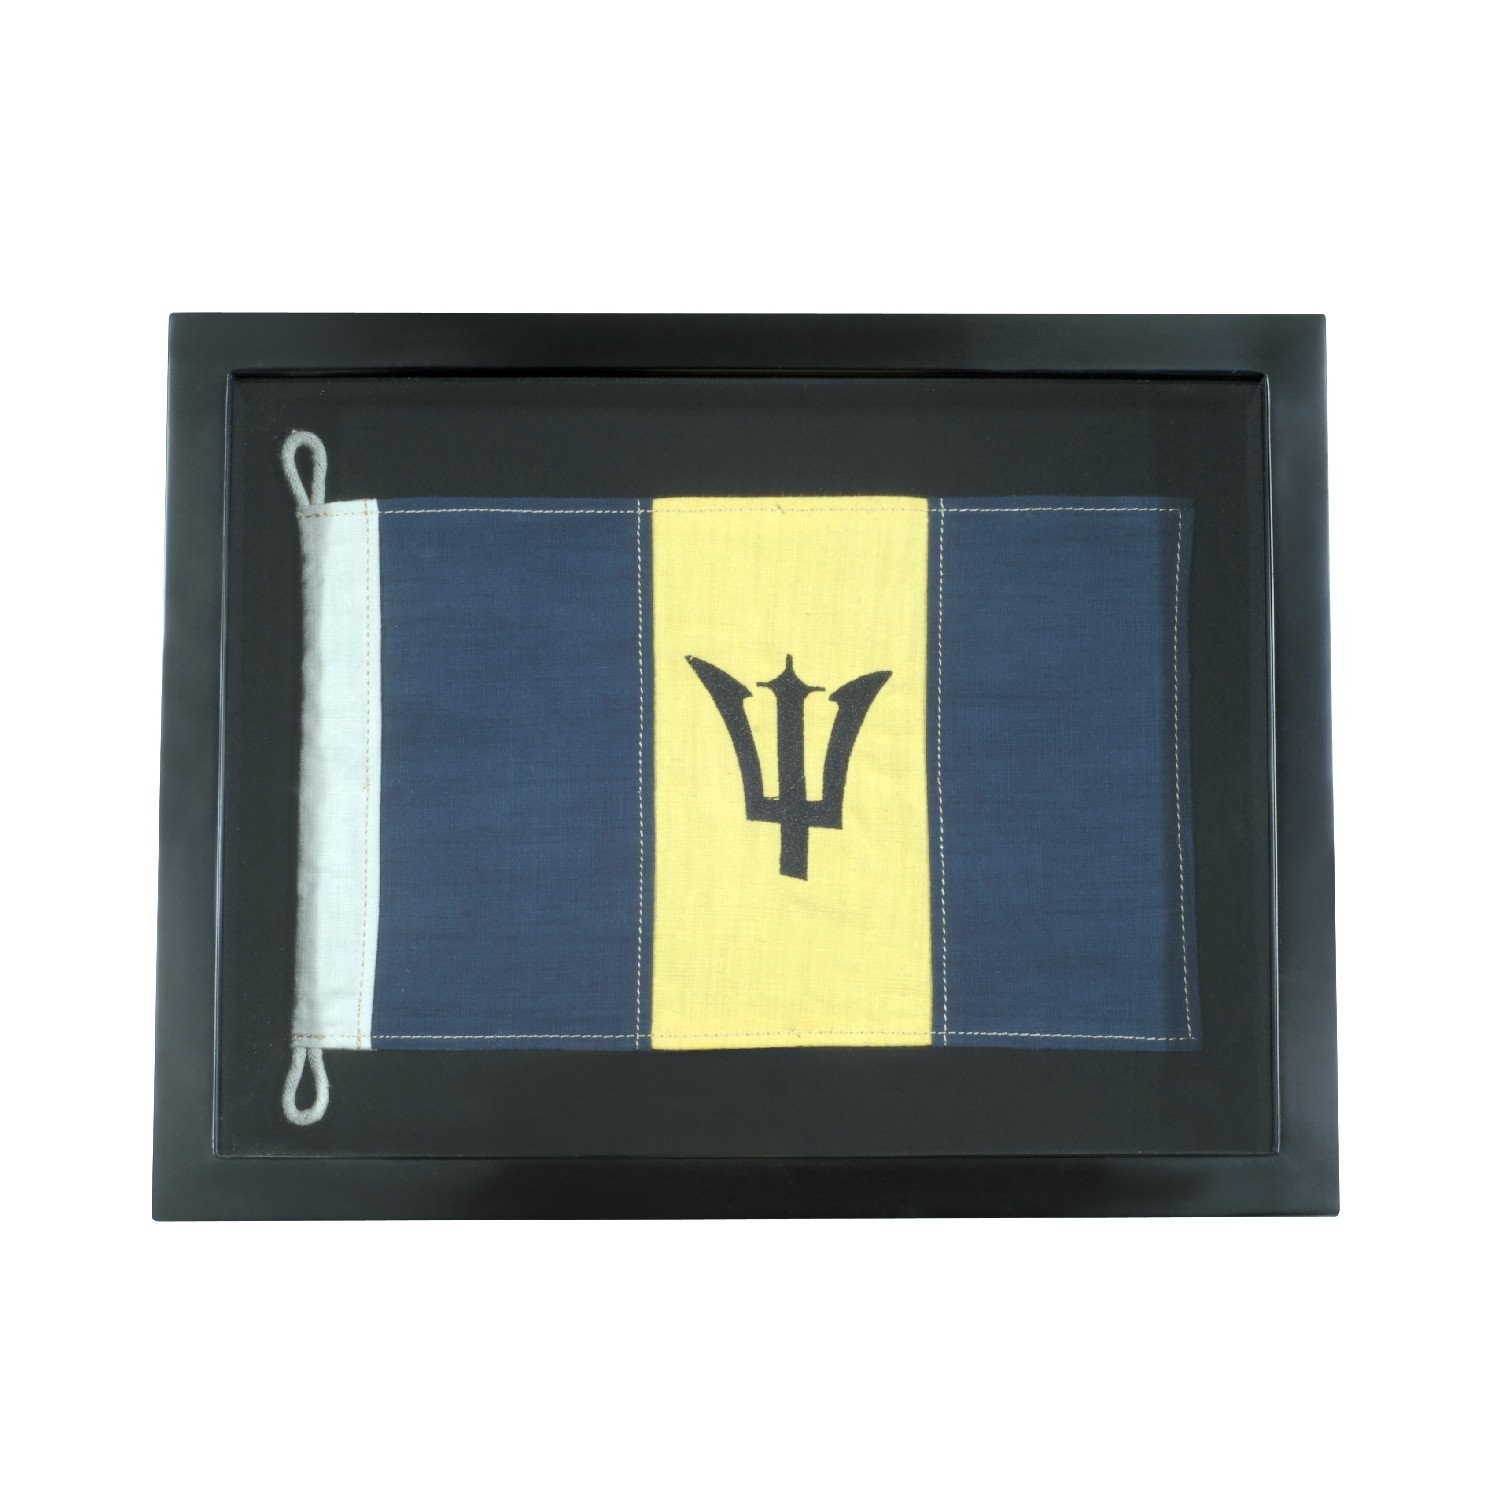 Photo of Timothy oulton flag shadow box small 90x60cm print in square in blue